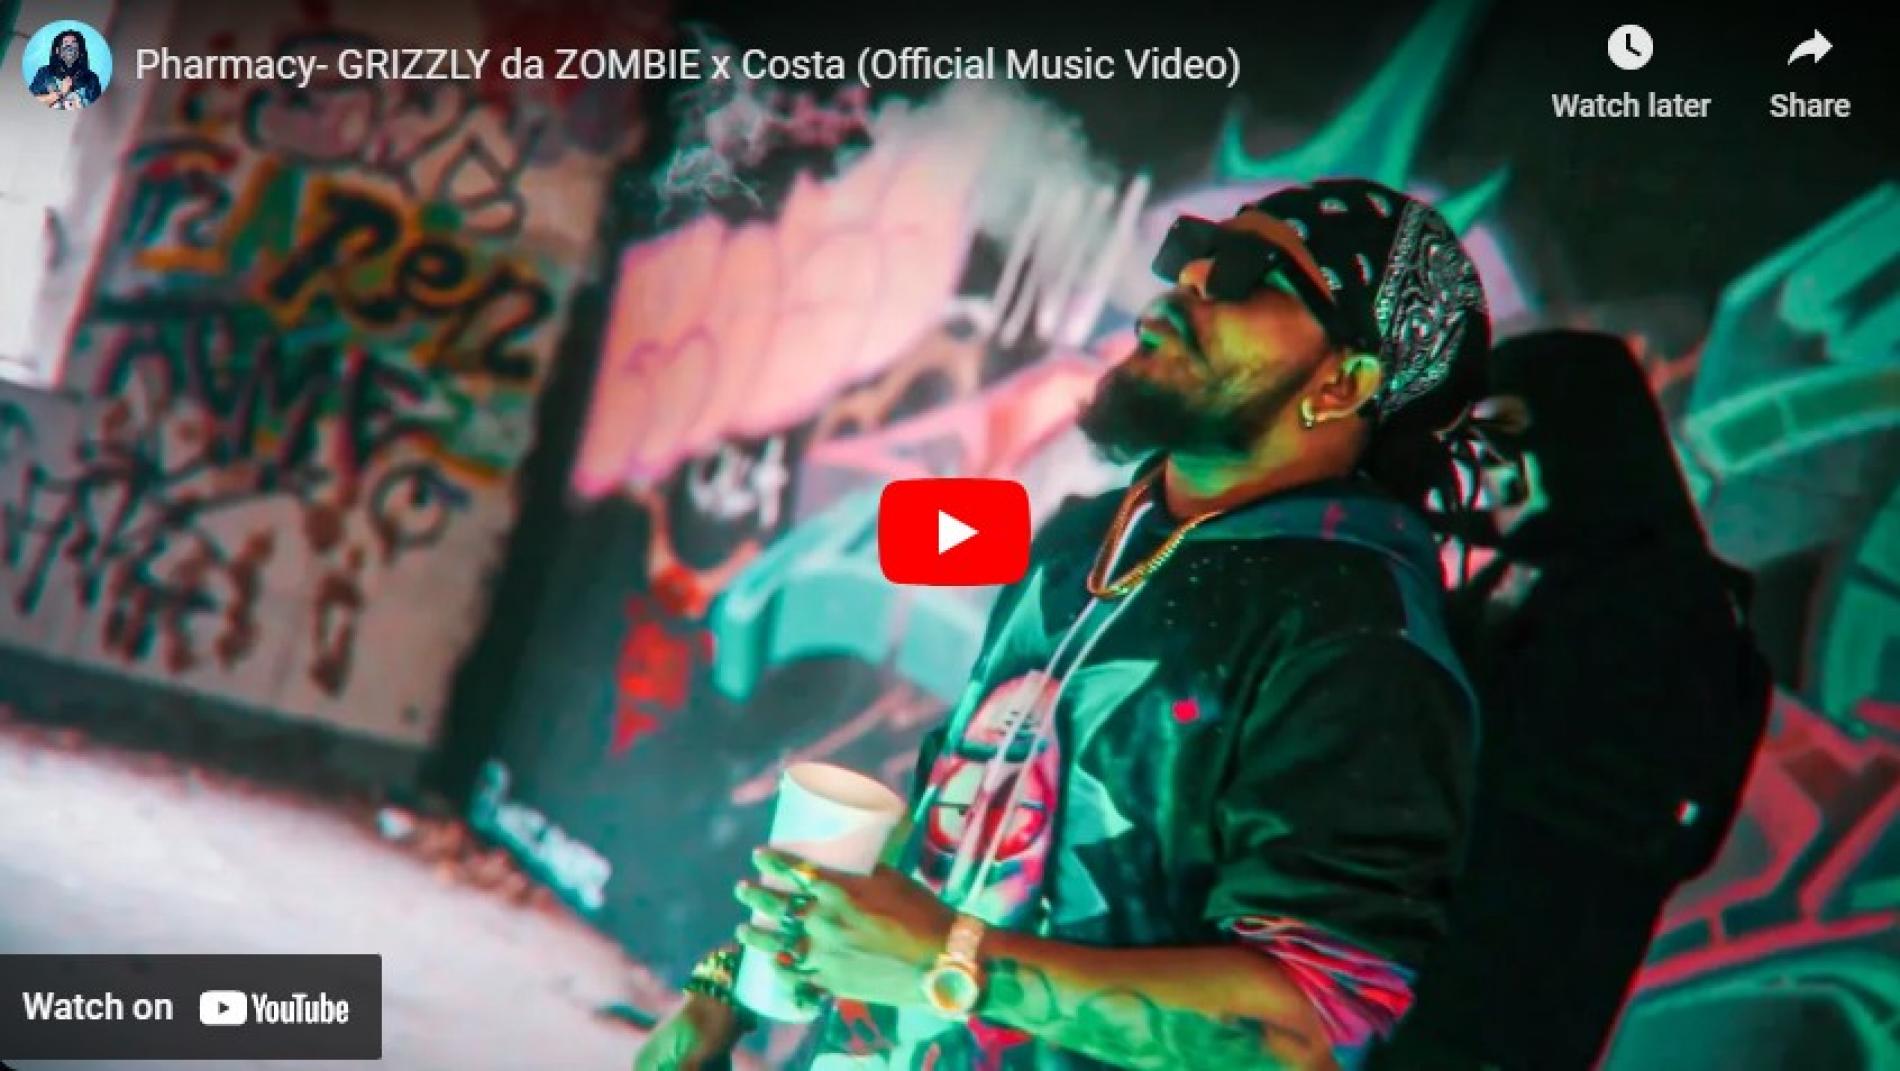 New Music : Pharmacy- GRIZZLY da ZOMBIE x Costa (Official Music Video)